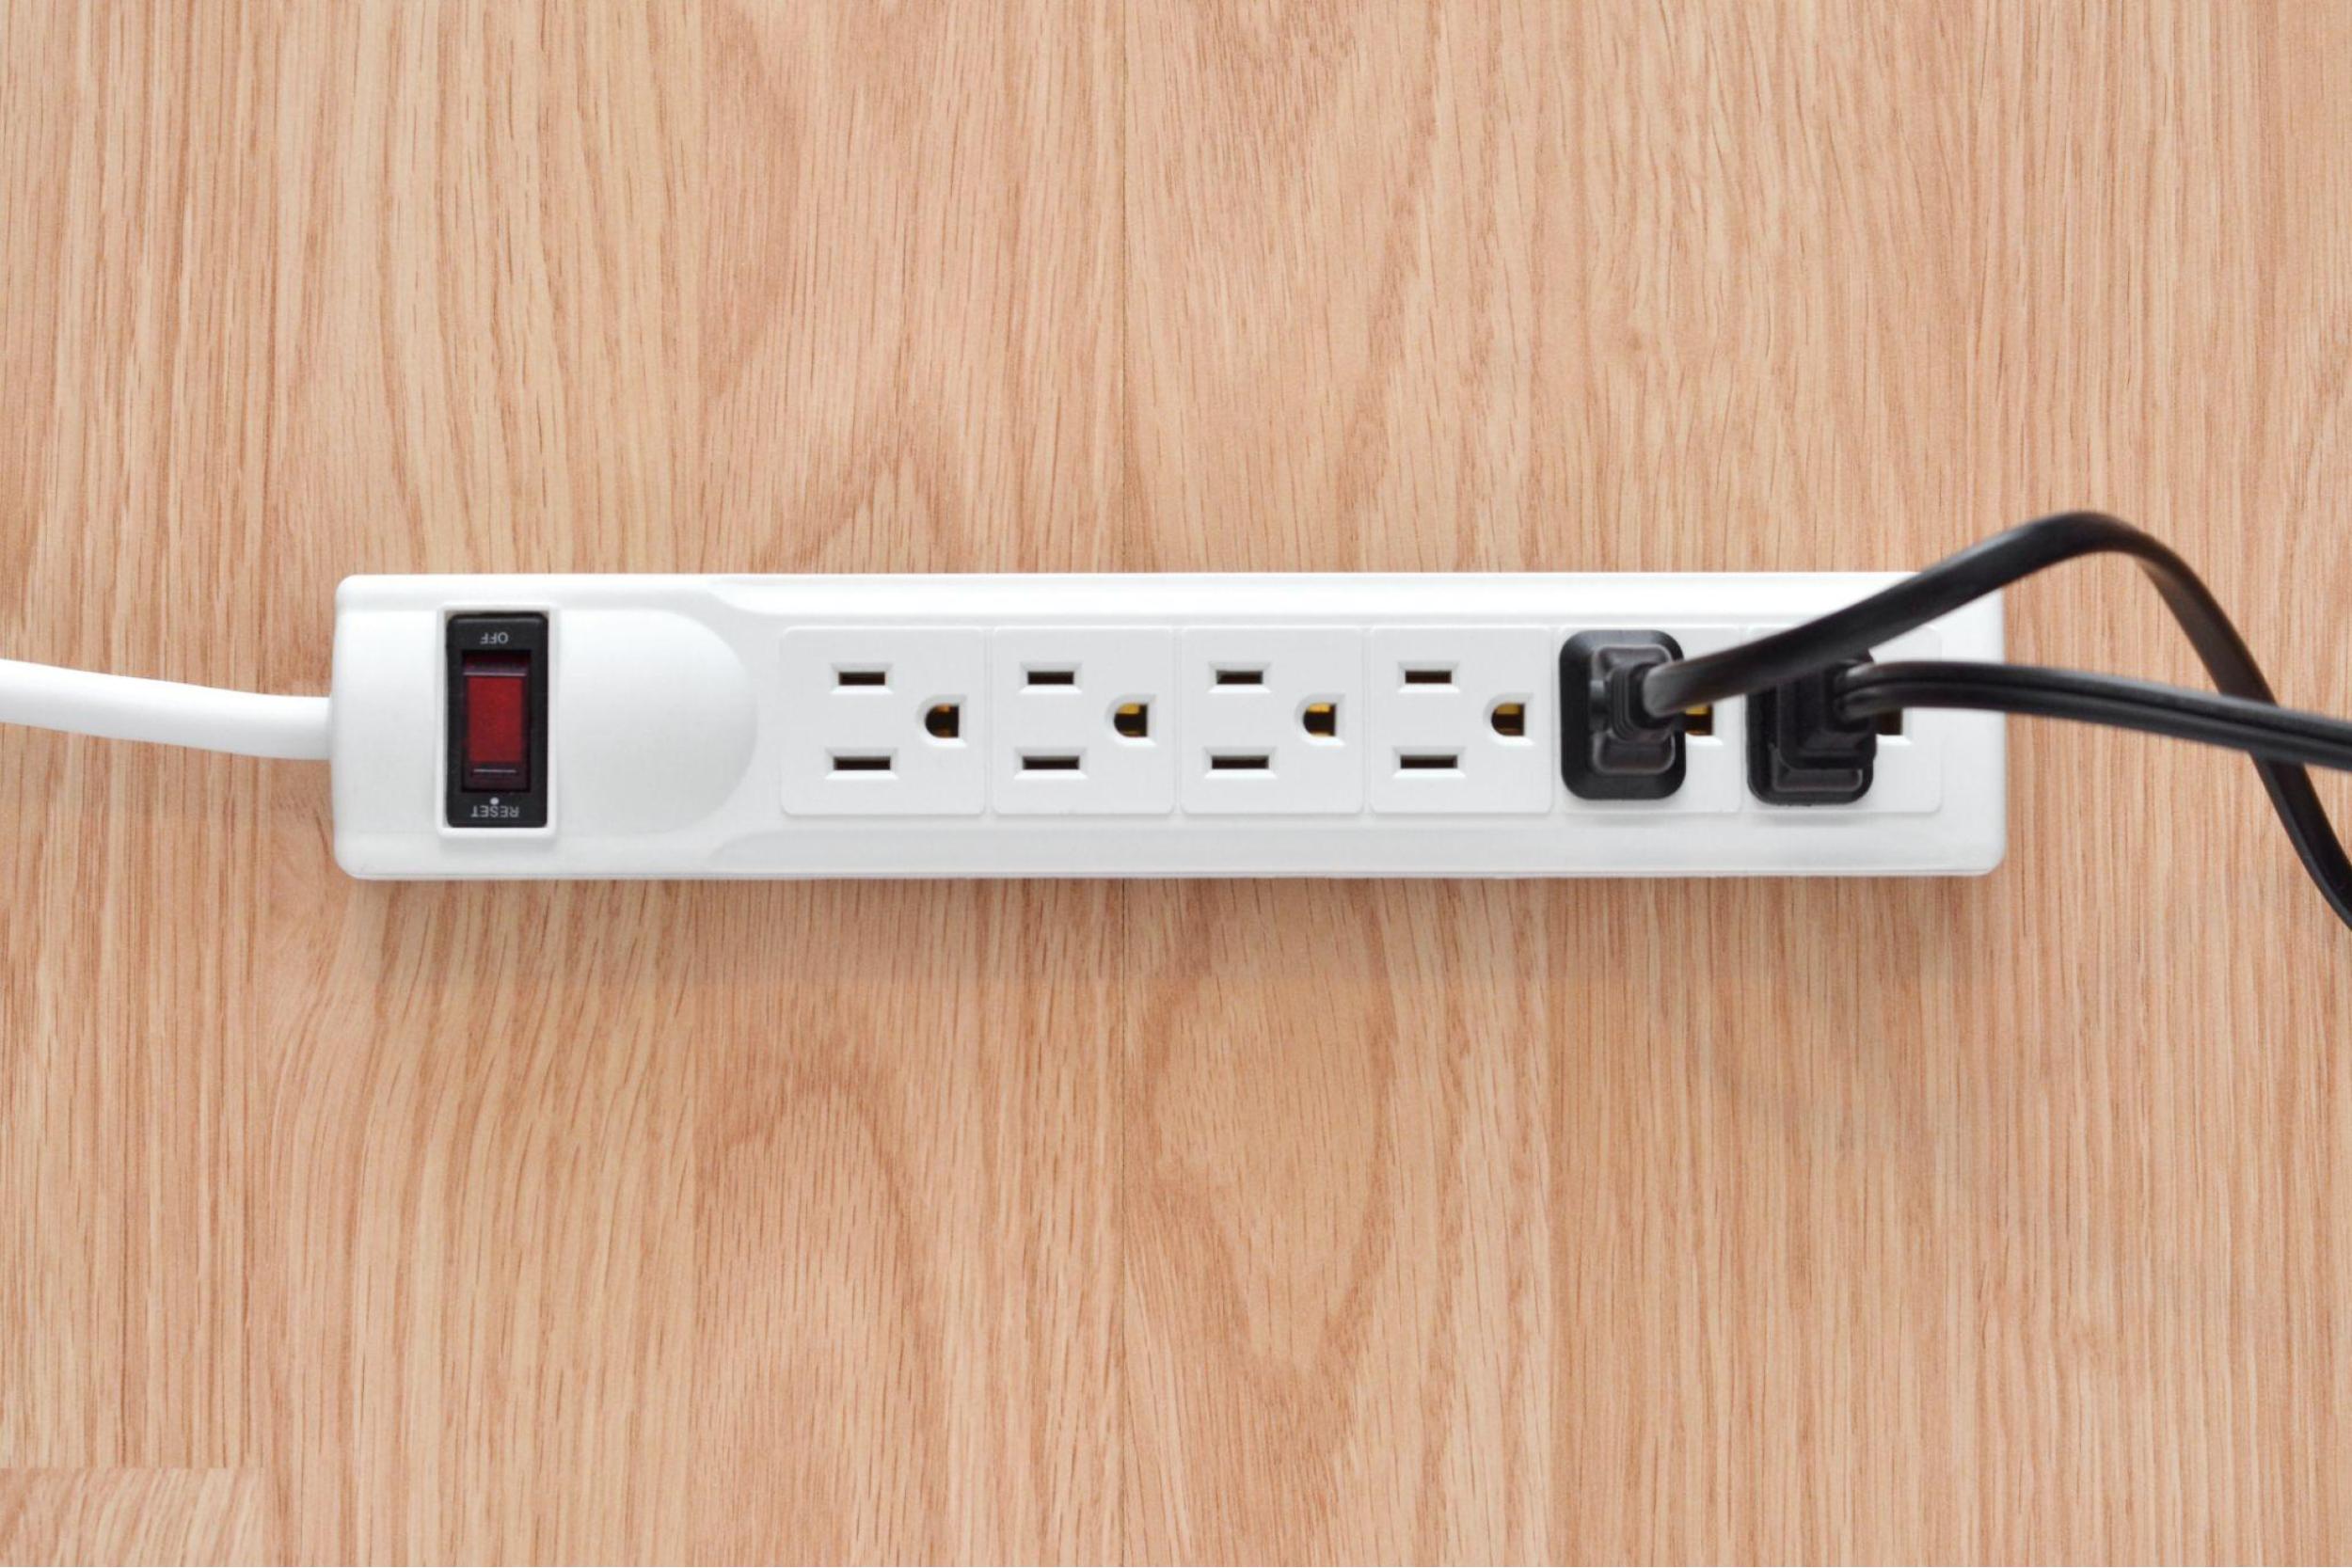 Mister Sparky Electrician Lower Electric Bill Summer Unplug Power Strip